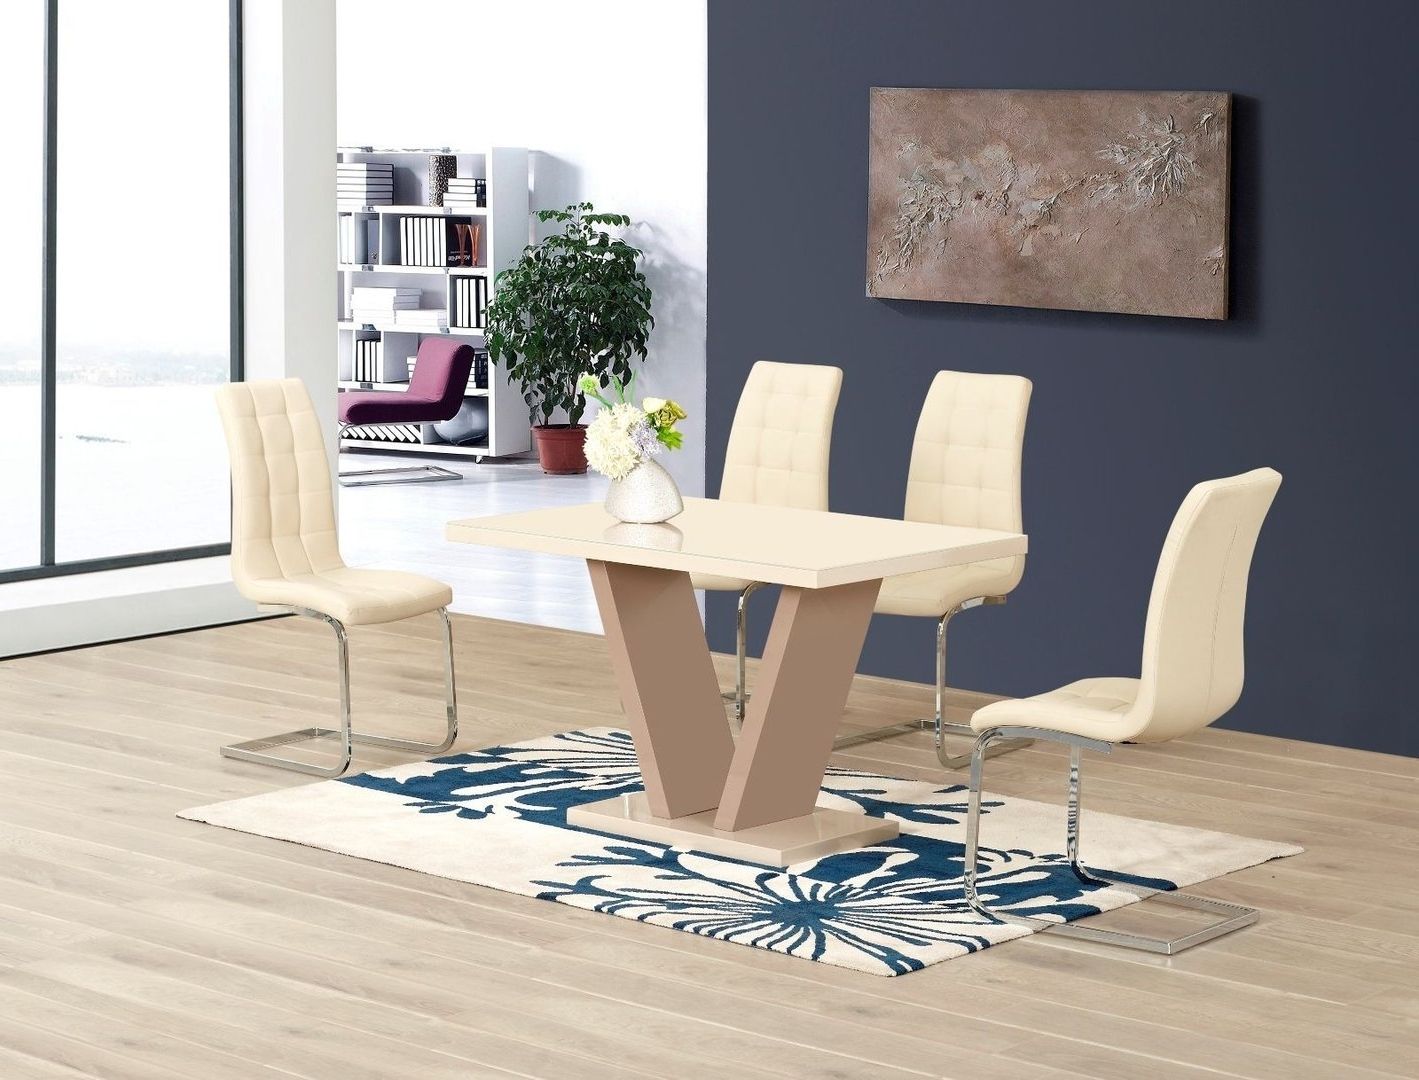 Glass And White Gloss Dining Tables Throughout Well Known Cream High Gloss Glass Dining Table And 6 Chairs – Homegenies (View 11 of 25)